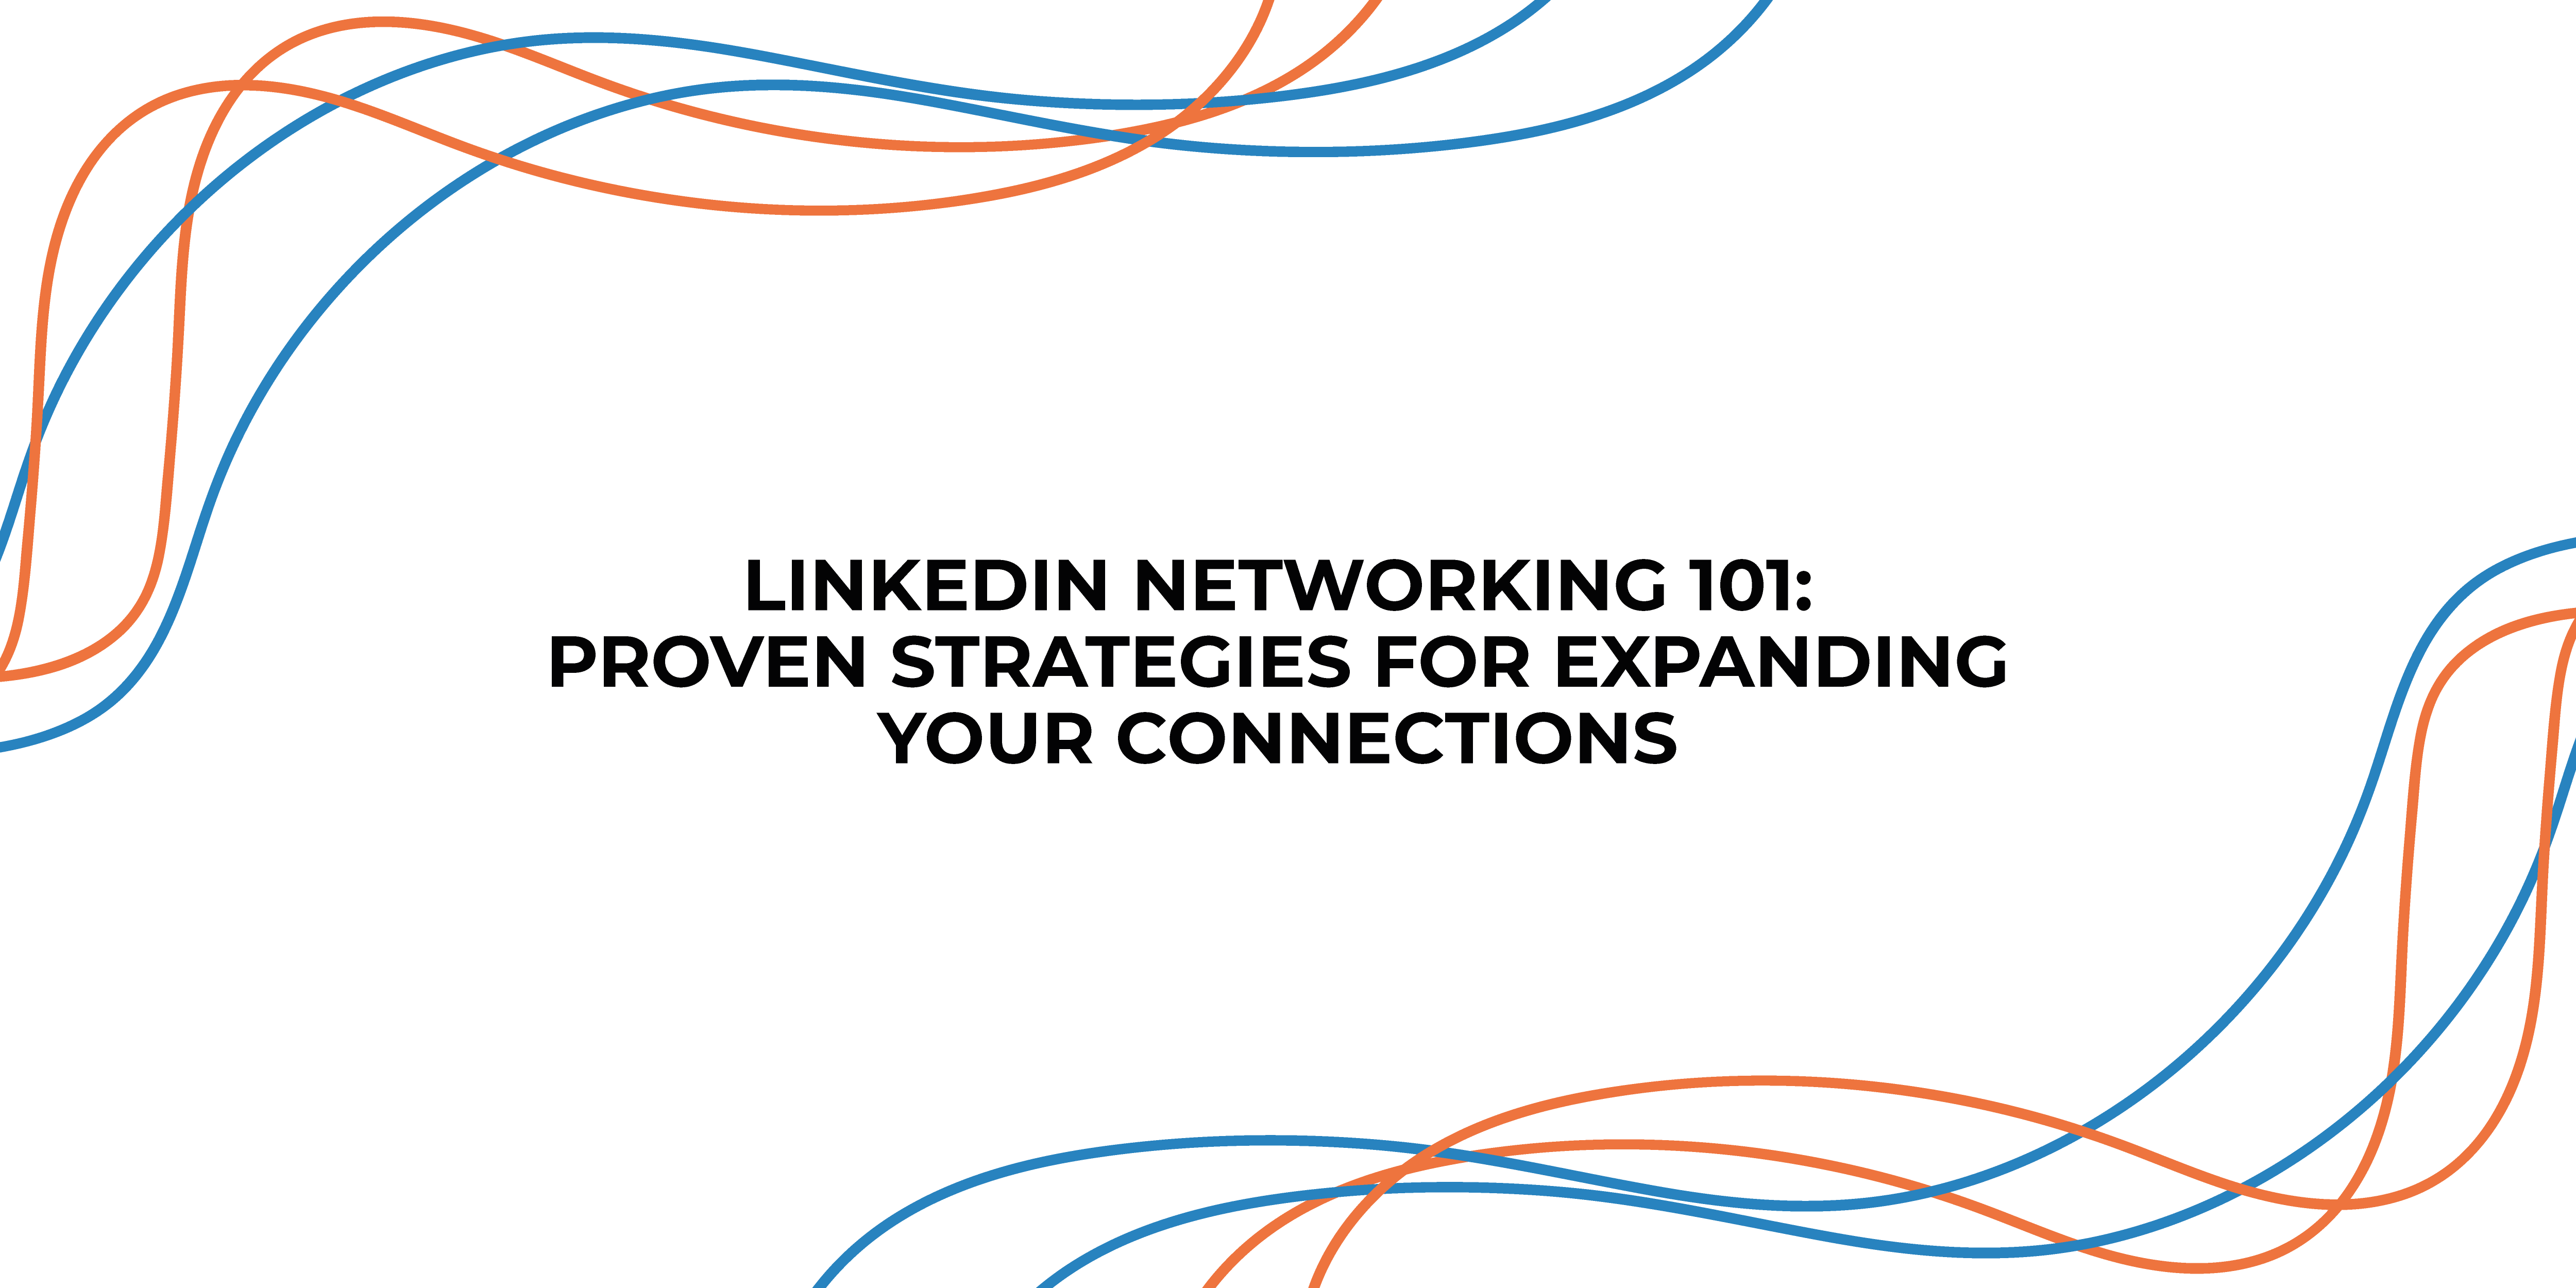 LinkedIn Networking 101: Proven Strategies for Expanding Your Connections